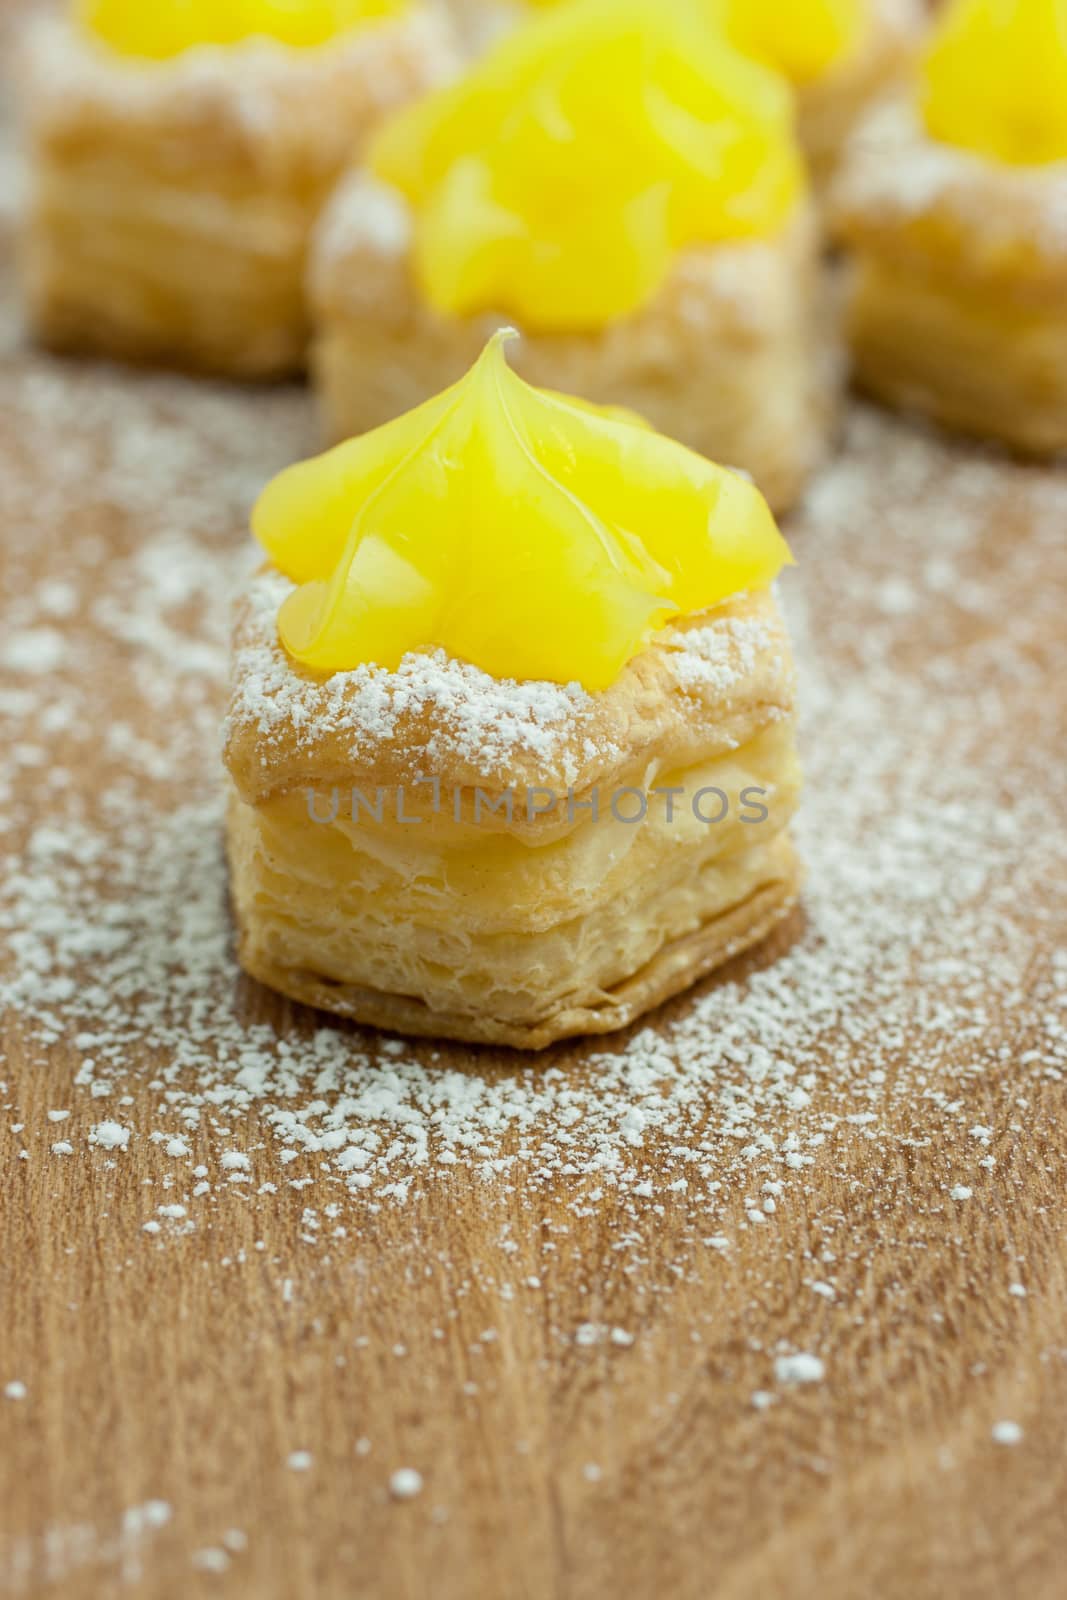 Lemon Pastry by SouthernLightStudios